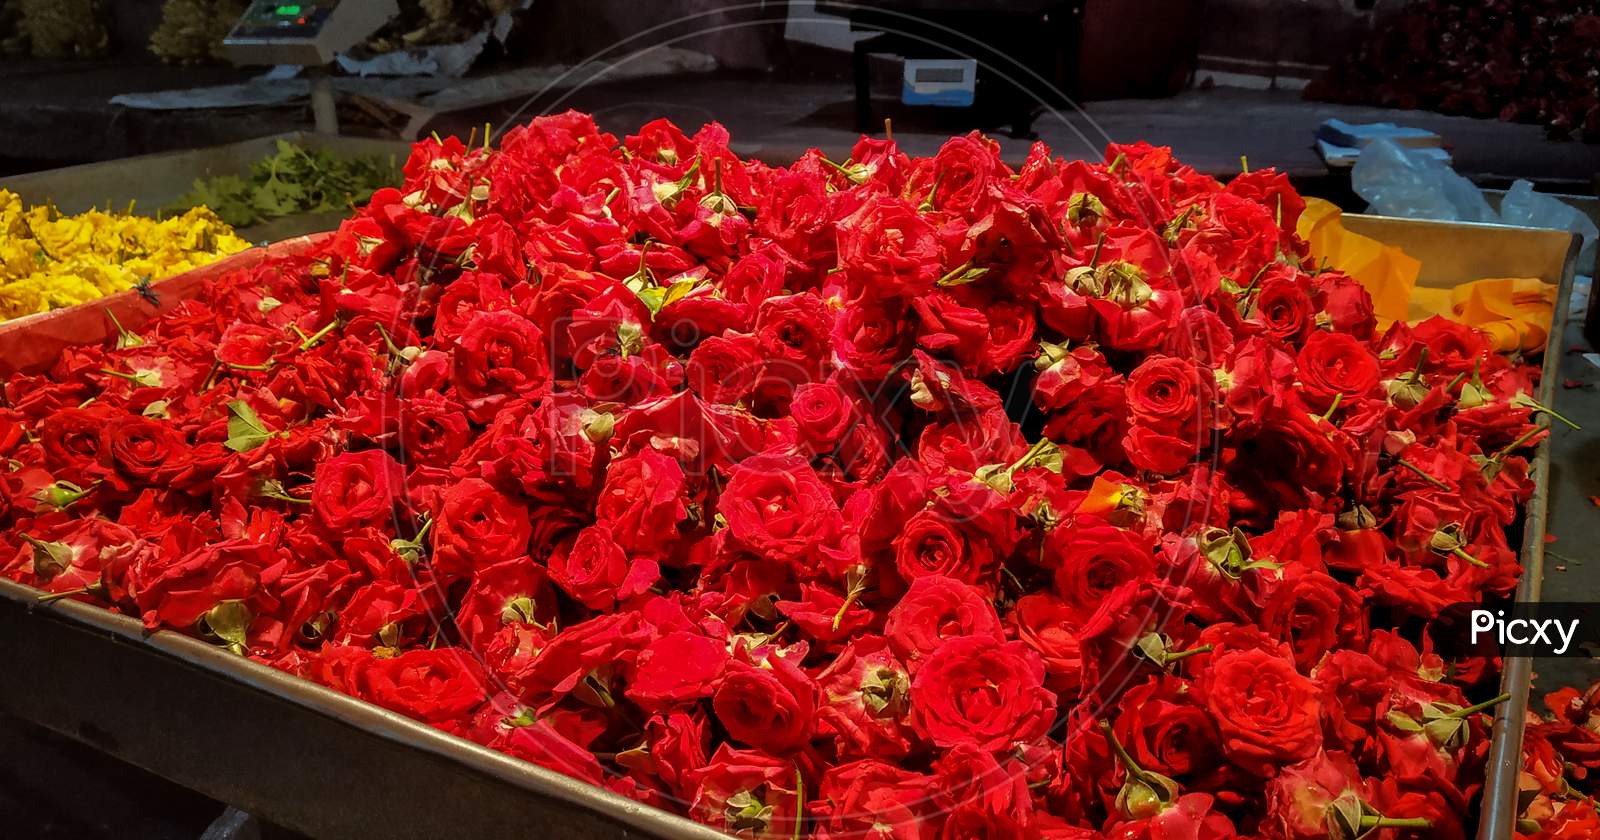 Pile Of Red Roses Kept In A Tray For Sale In A Indian Market